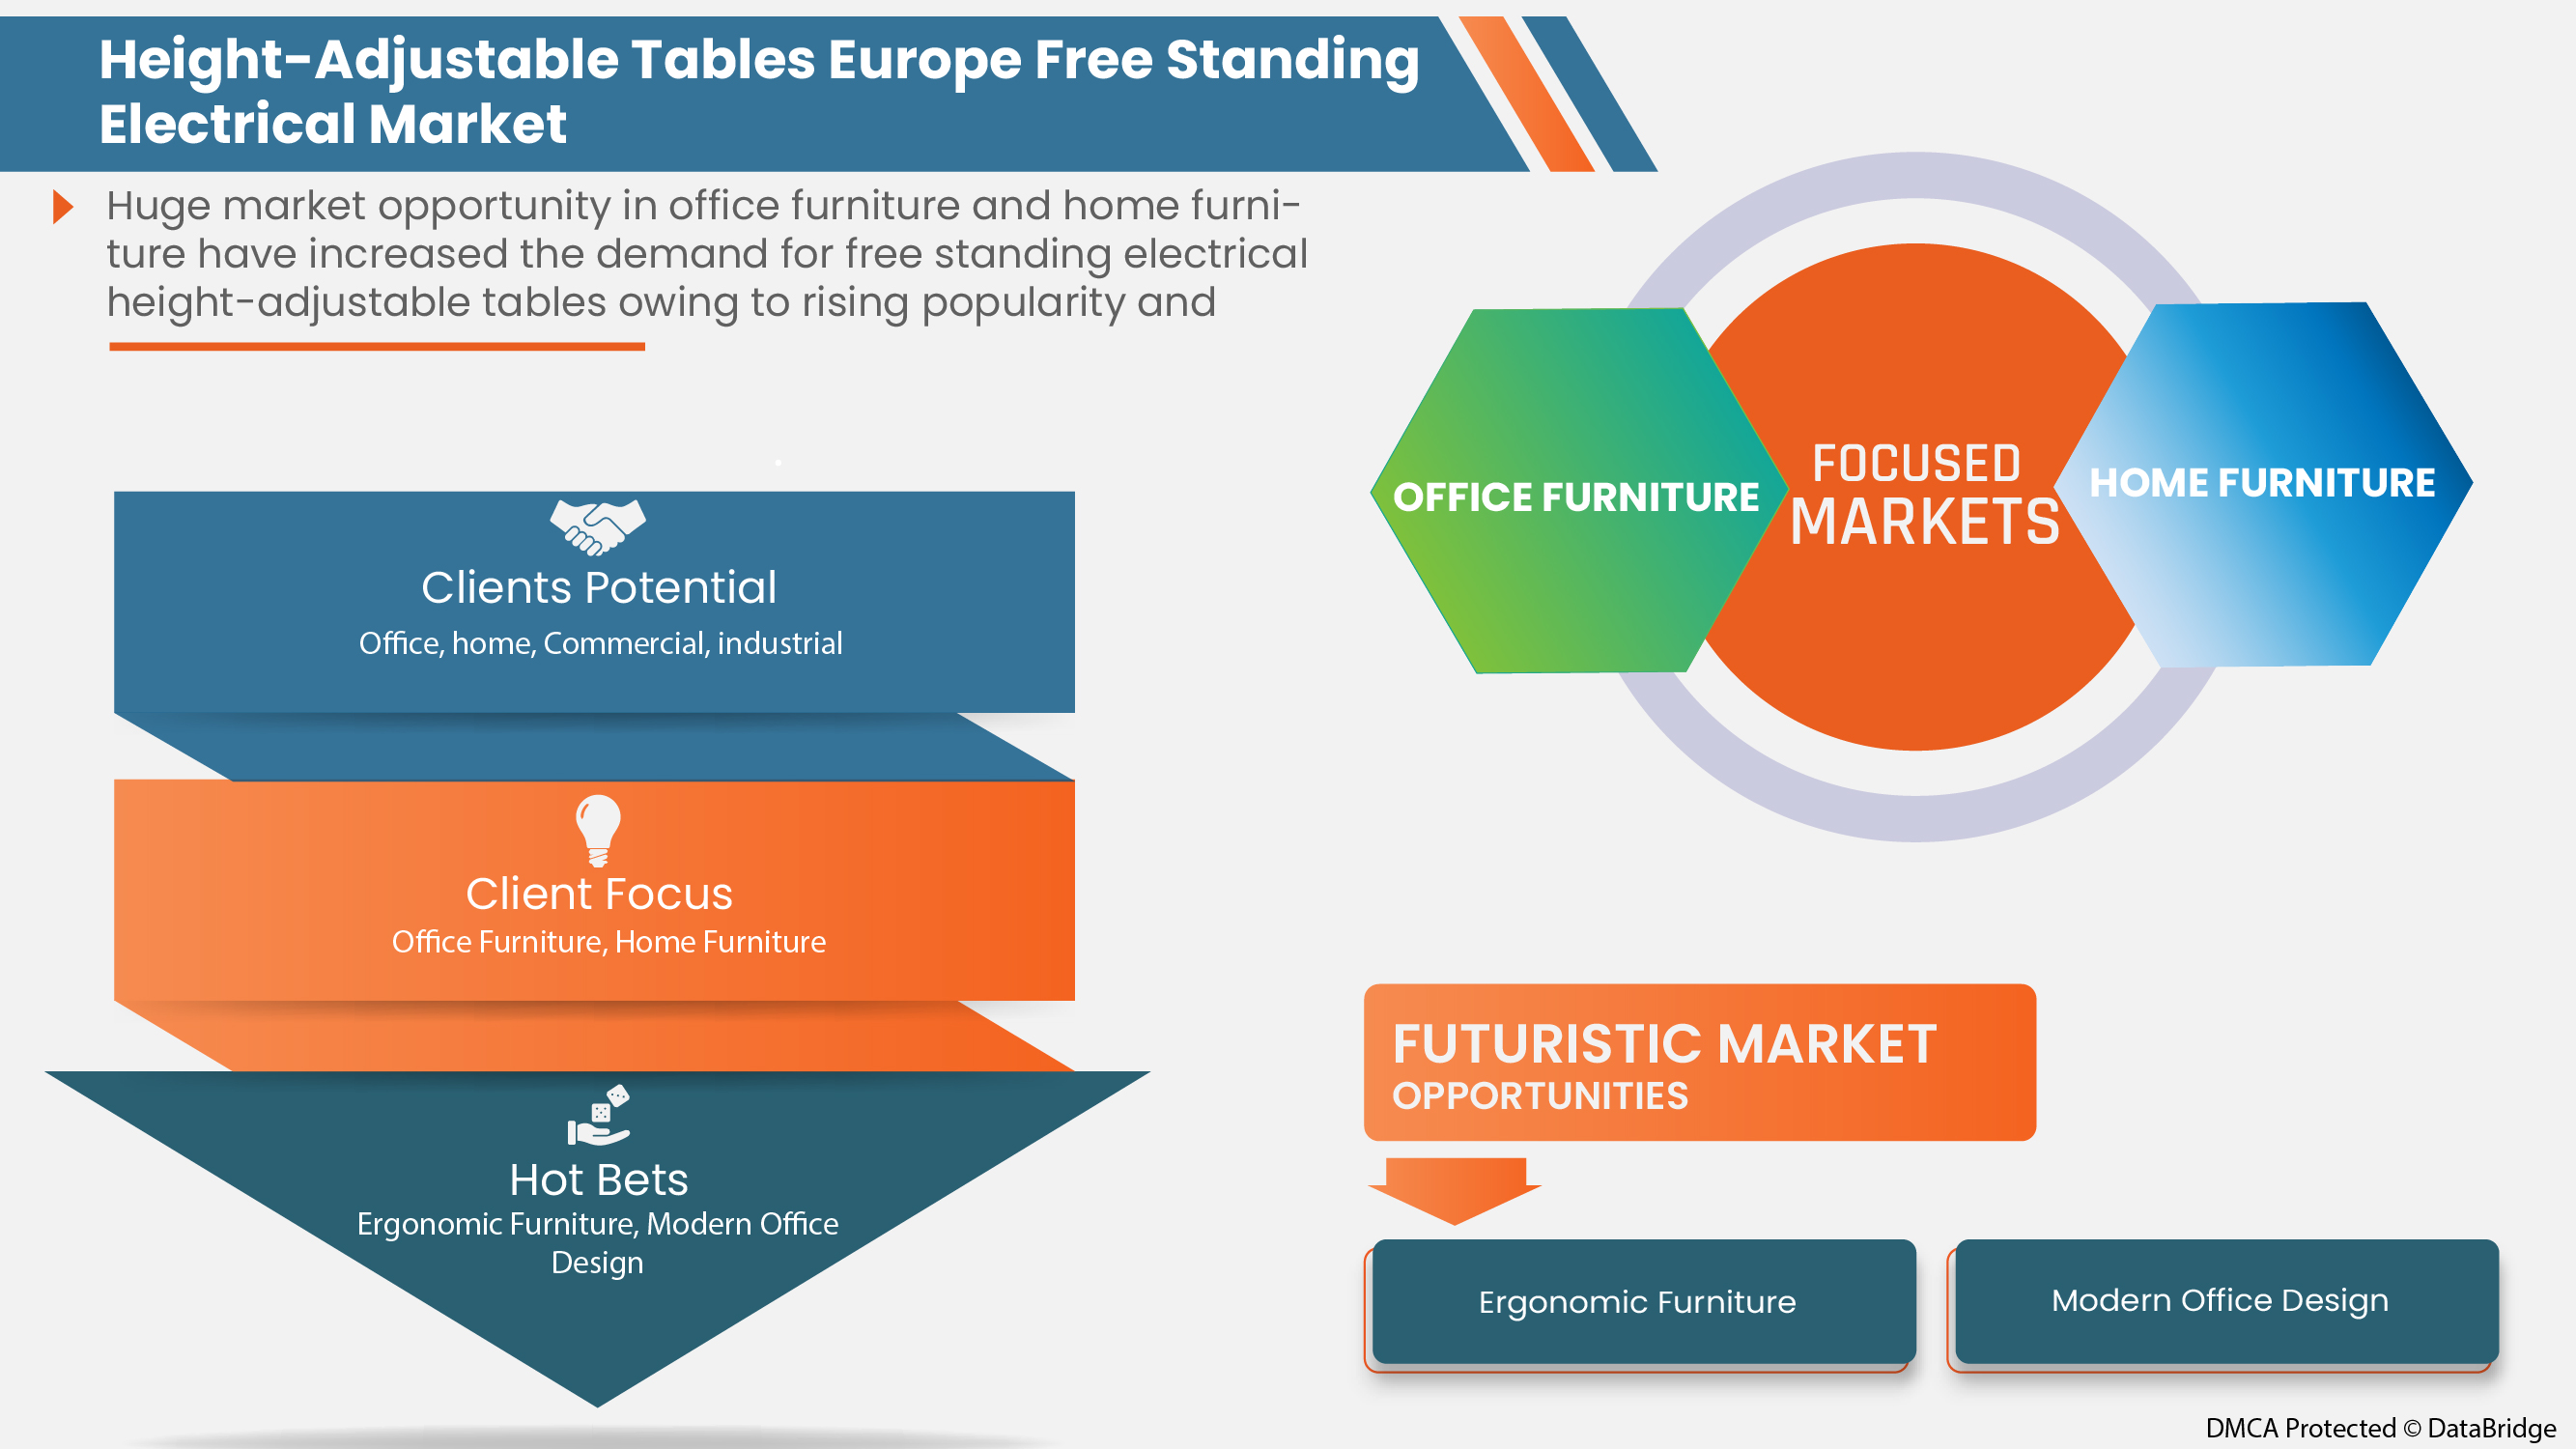 Europe Free Standing Electrical Height-Adjustable Tables Market